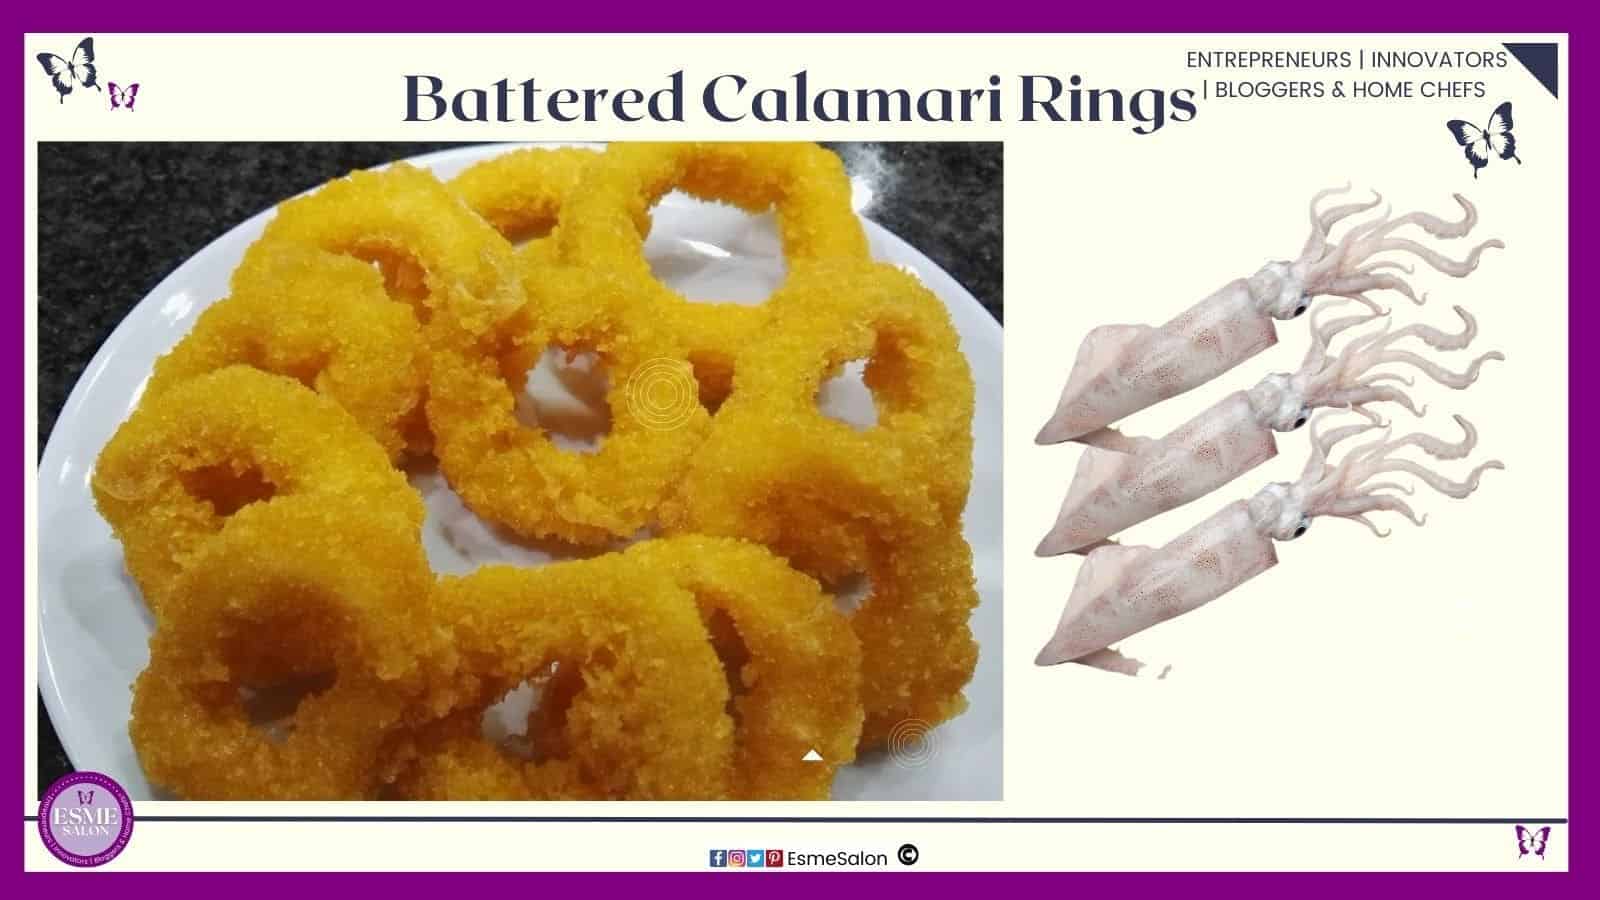 an image of a white round plate filled with flour Battered Calamari Rings